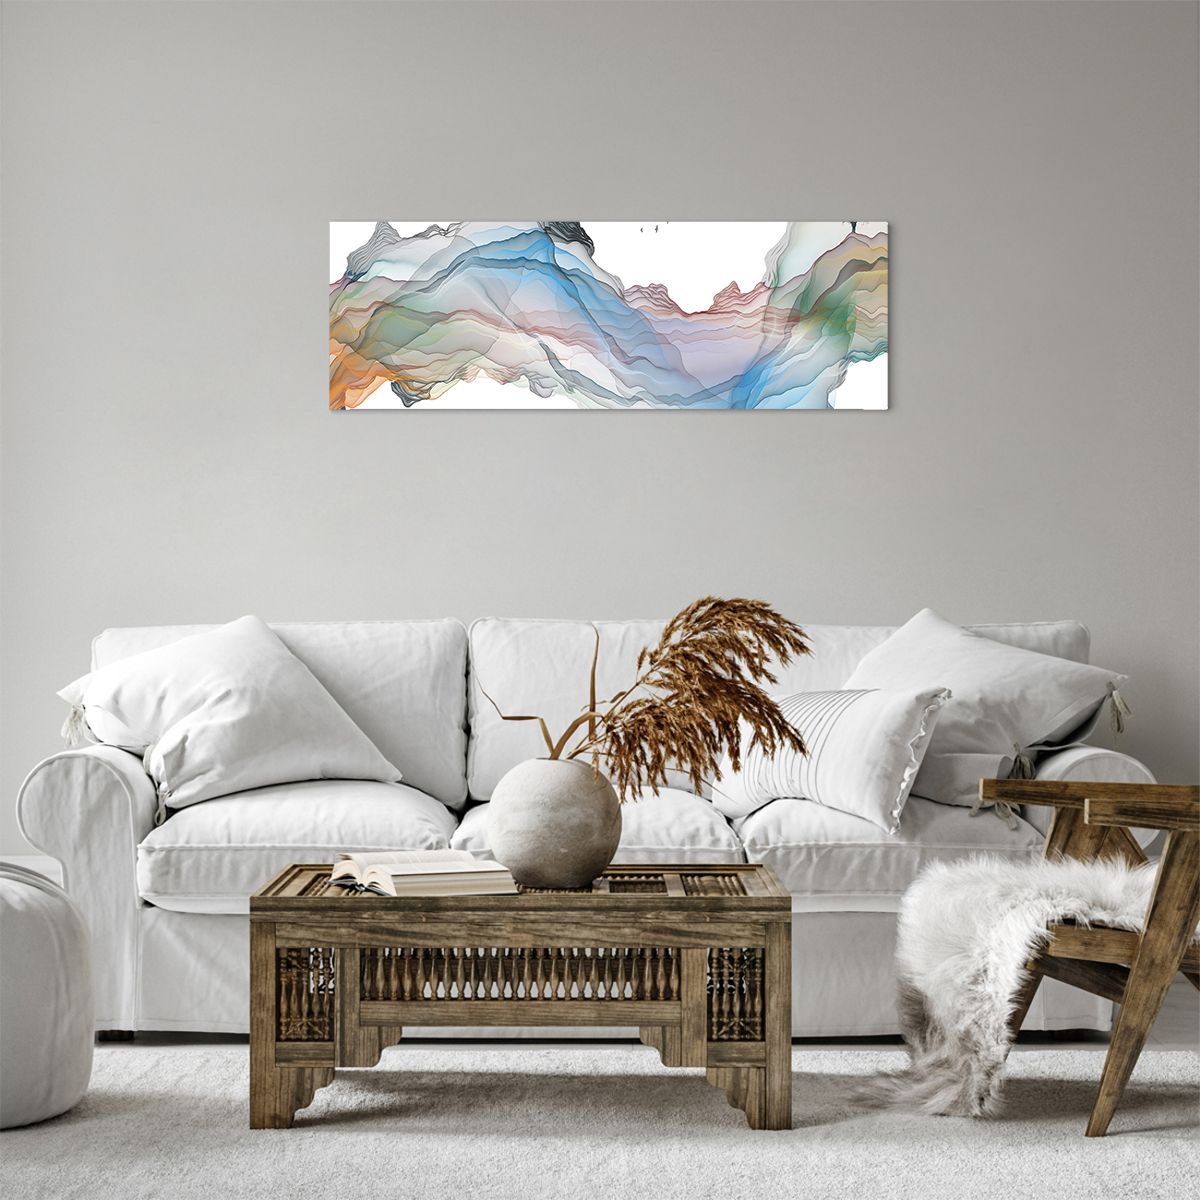 Canvas picture Abstraction, Canvas picture Fantasy, Canvas picture Landscape, Canvas picture Art, Canvas picture Modern Art